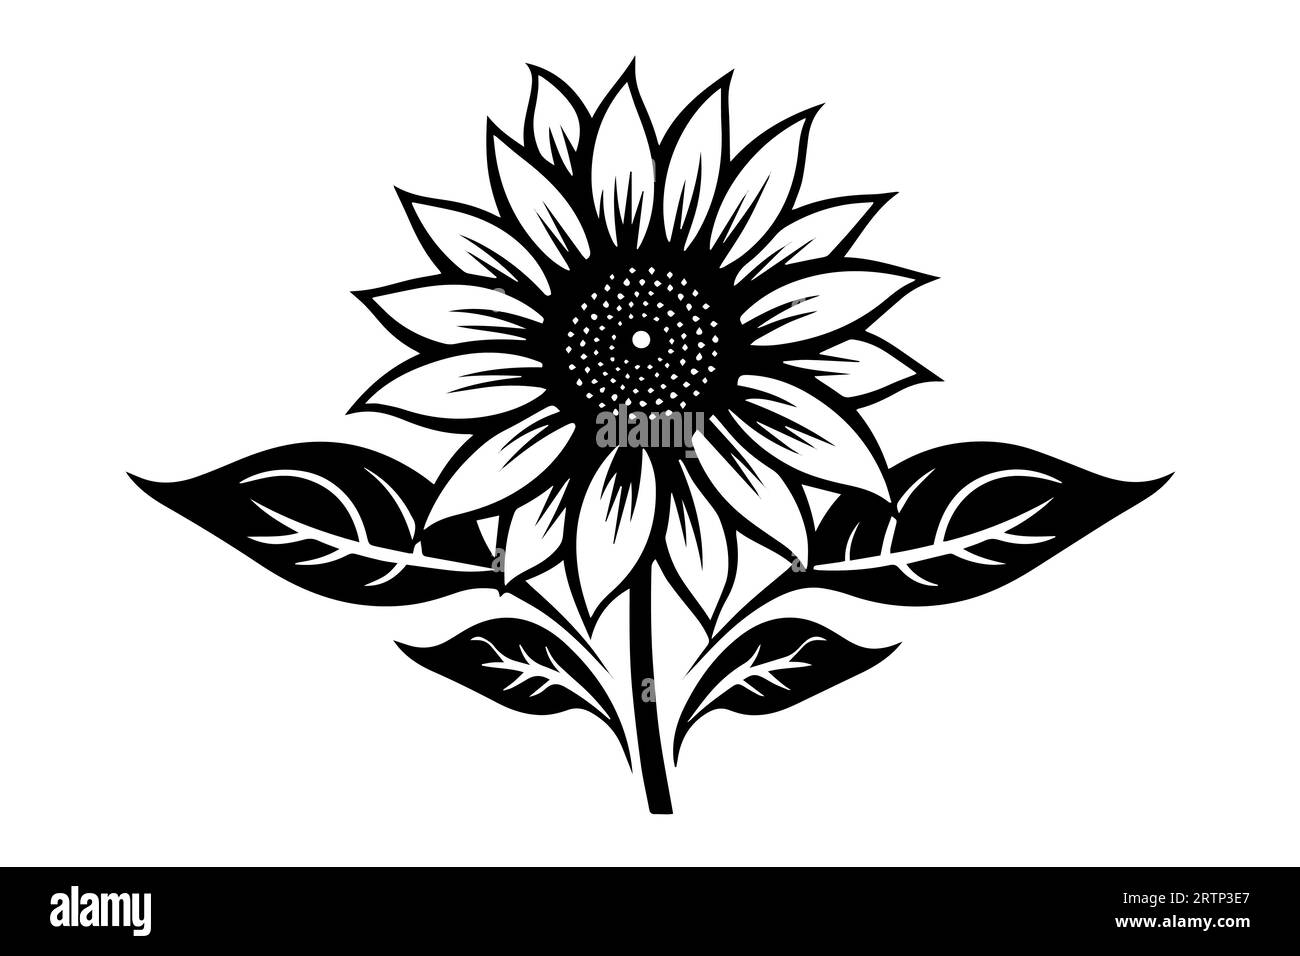 Vector engraving style drawing vector illustration of sunflower. Ink ...